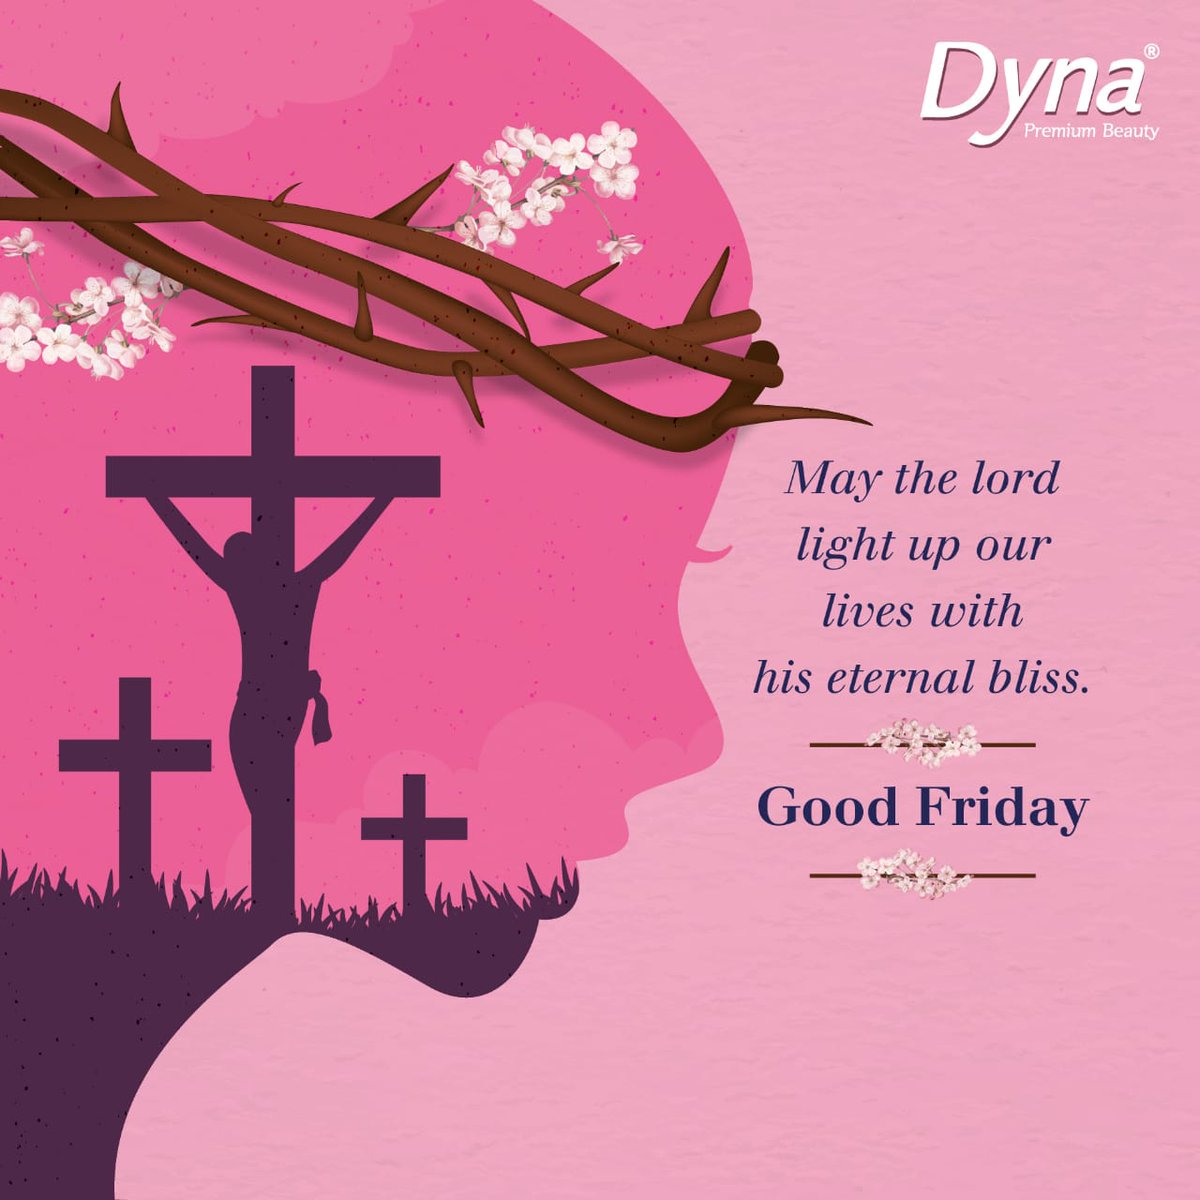 Seeking blessings and grace of the Lord.

#GoodFriday #TheDynaLook #DynaCare #Dyna #IndianSoap